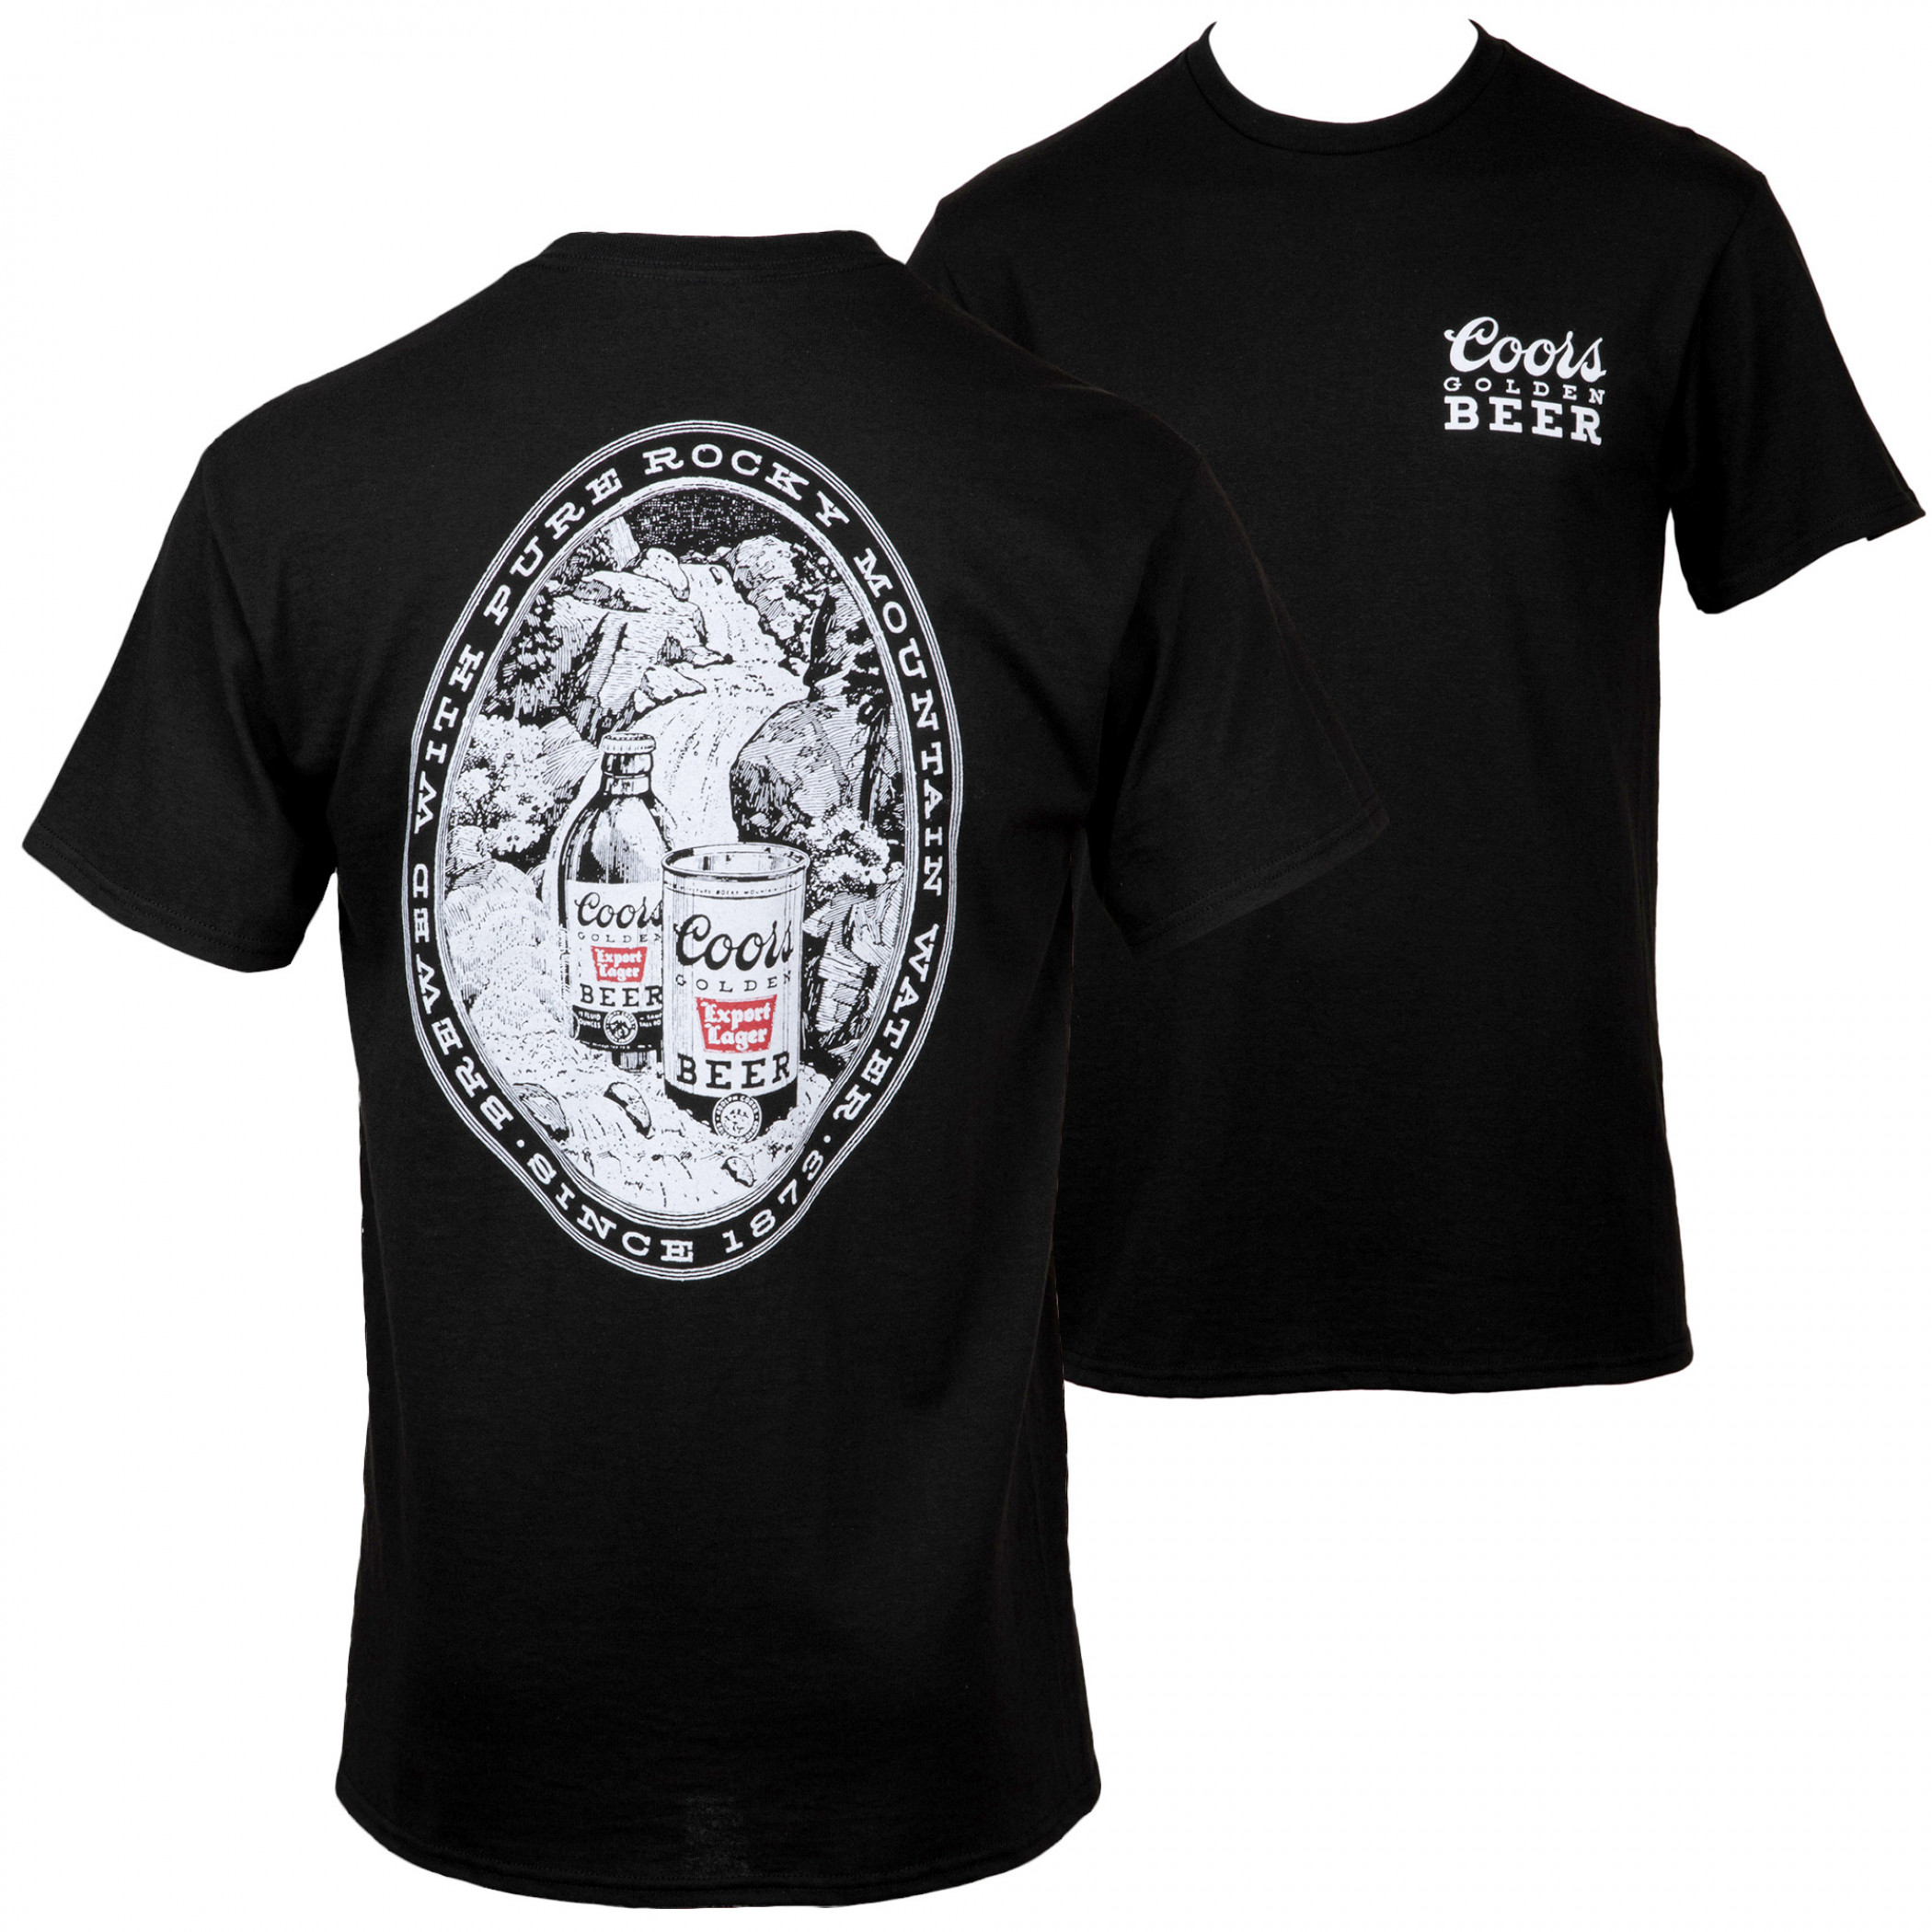 Coors Golden Beer Since 1873 Classic Label Front & Back Print T-Shirt